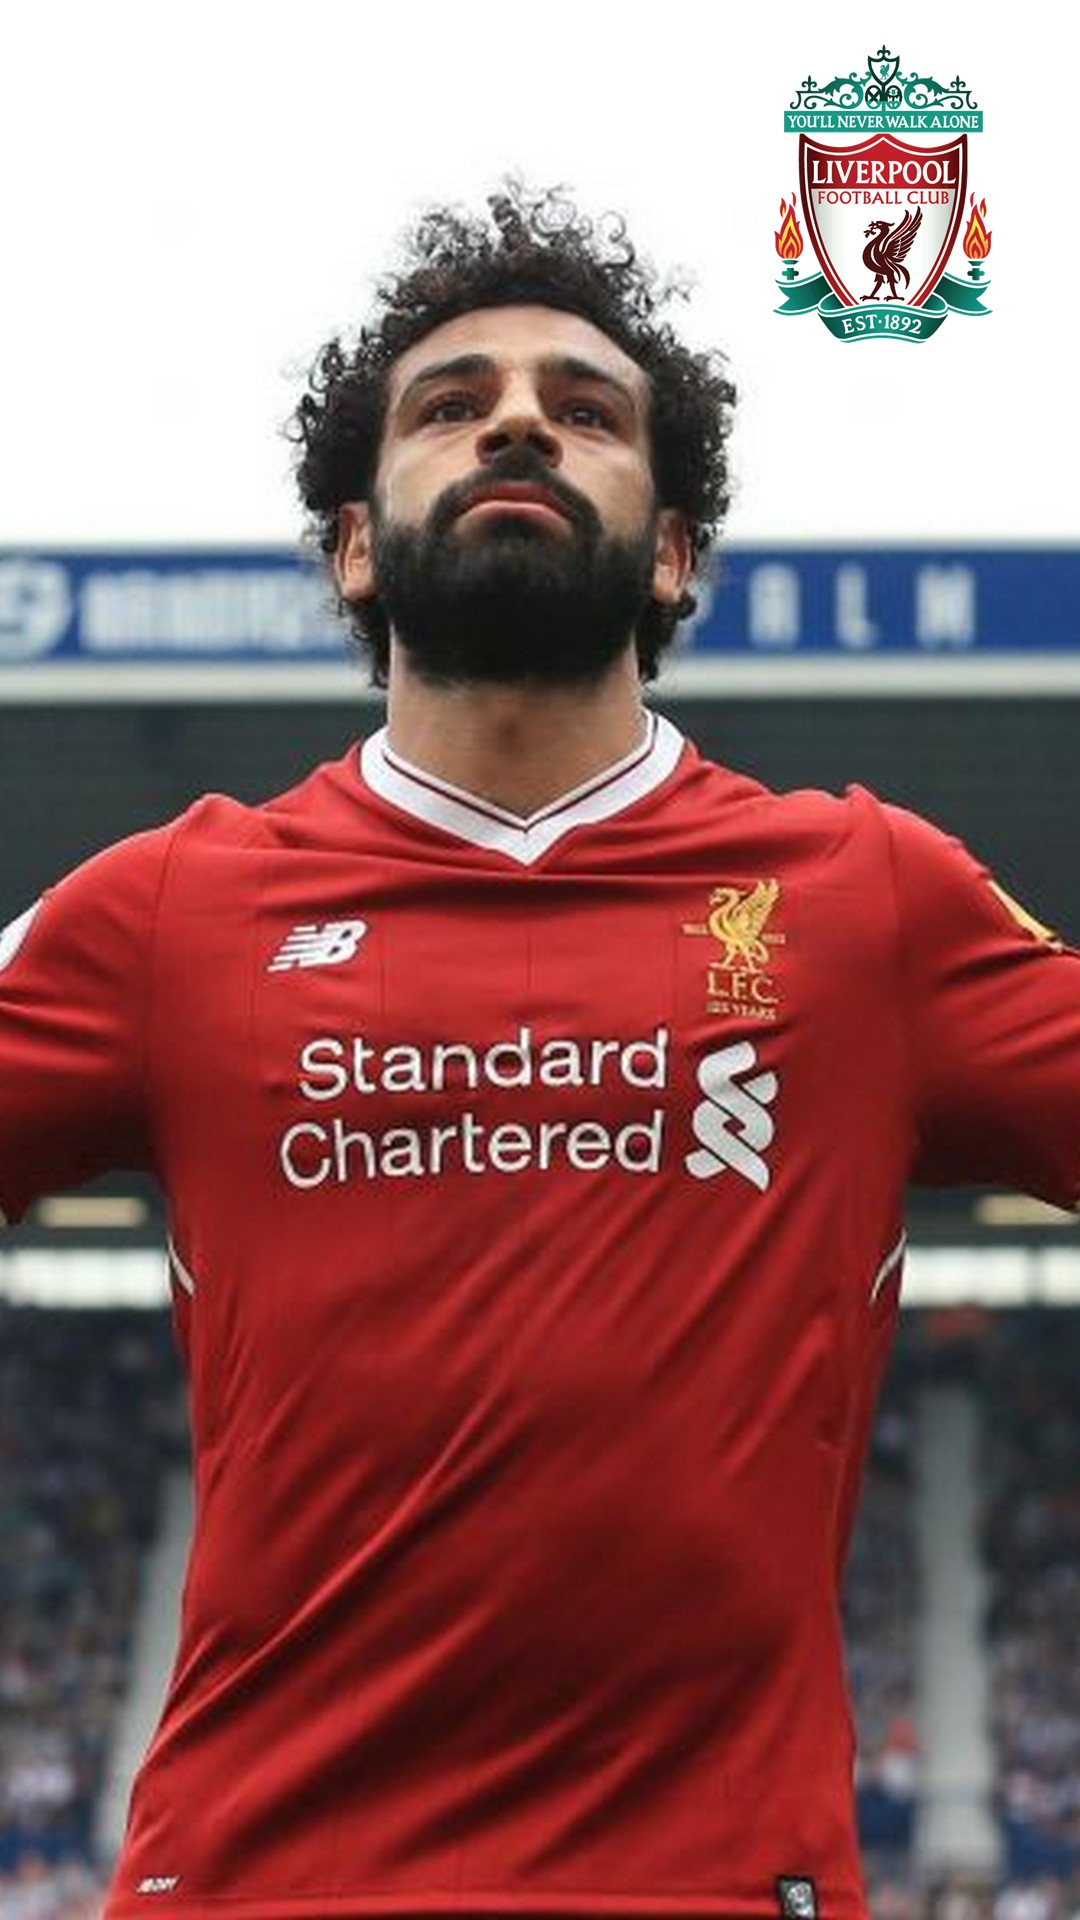 Mohamed Salah Pictures Wallpaper For iPhone with resolution 1080X1920 pixel. You can make this wallpaper for your iPhone 5, 6, 7, 8, X backgrounds, Mobile Screensaver, or iPad Lock Screen